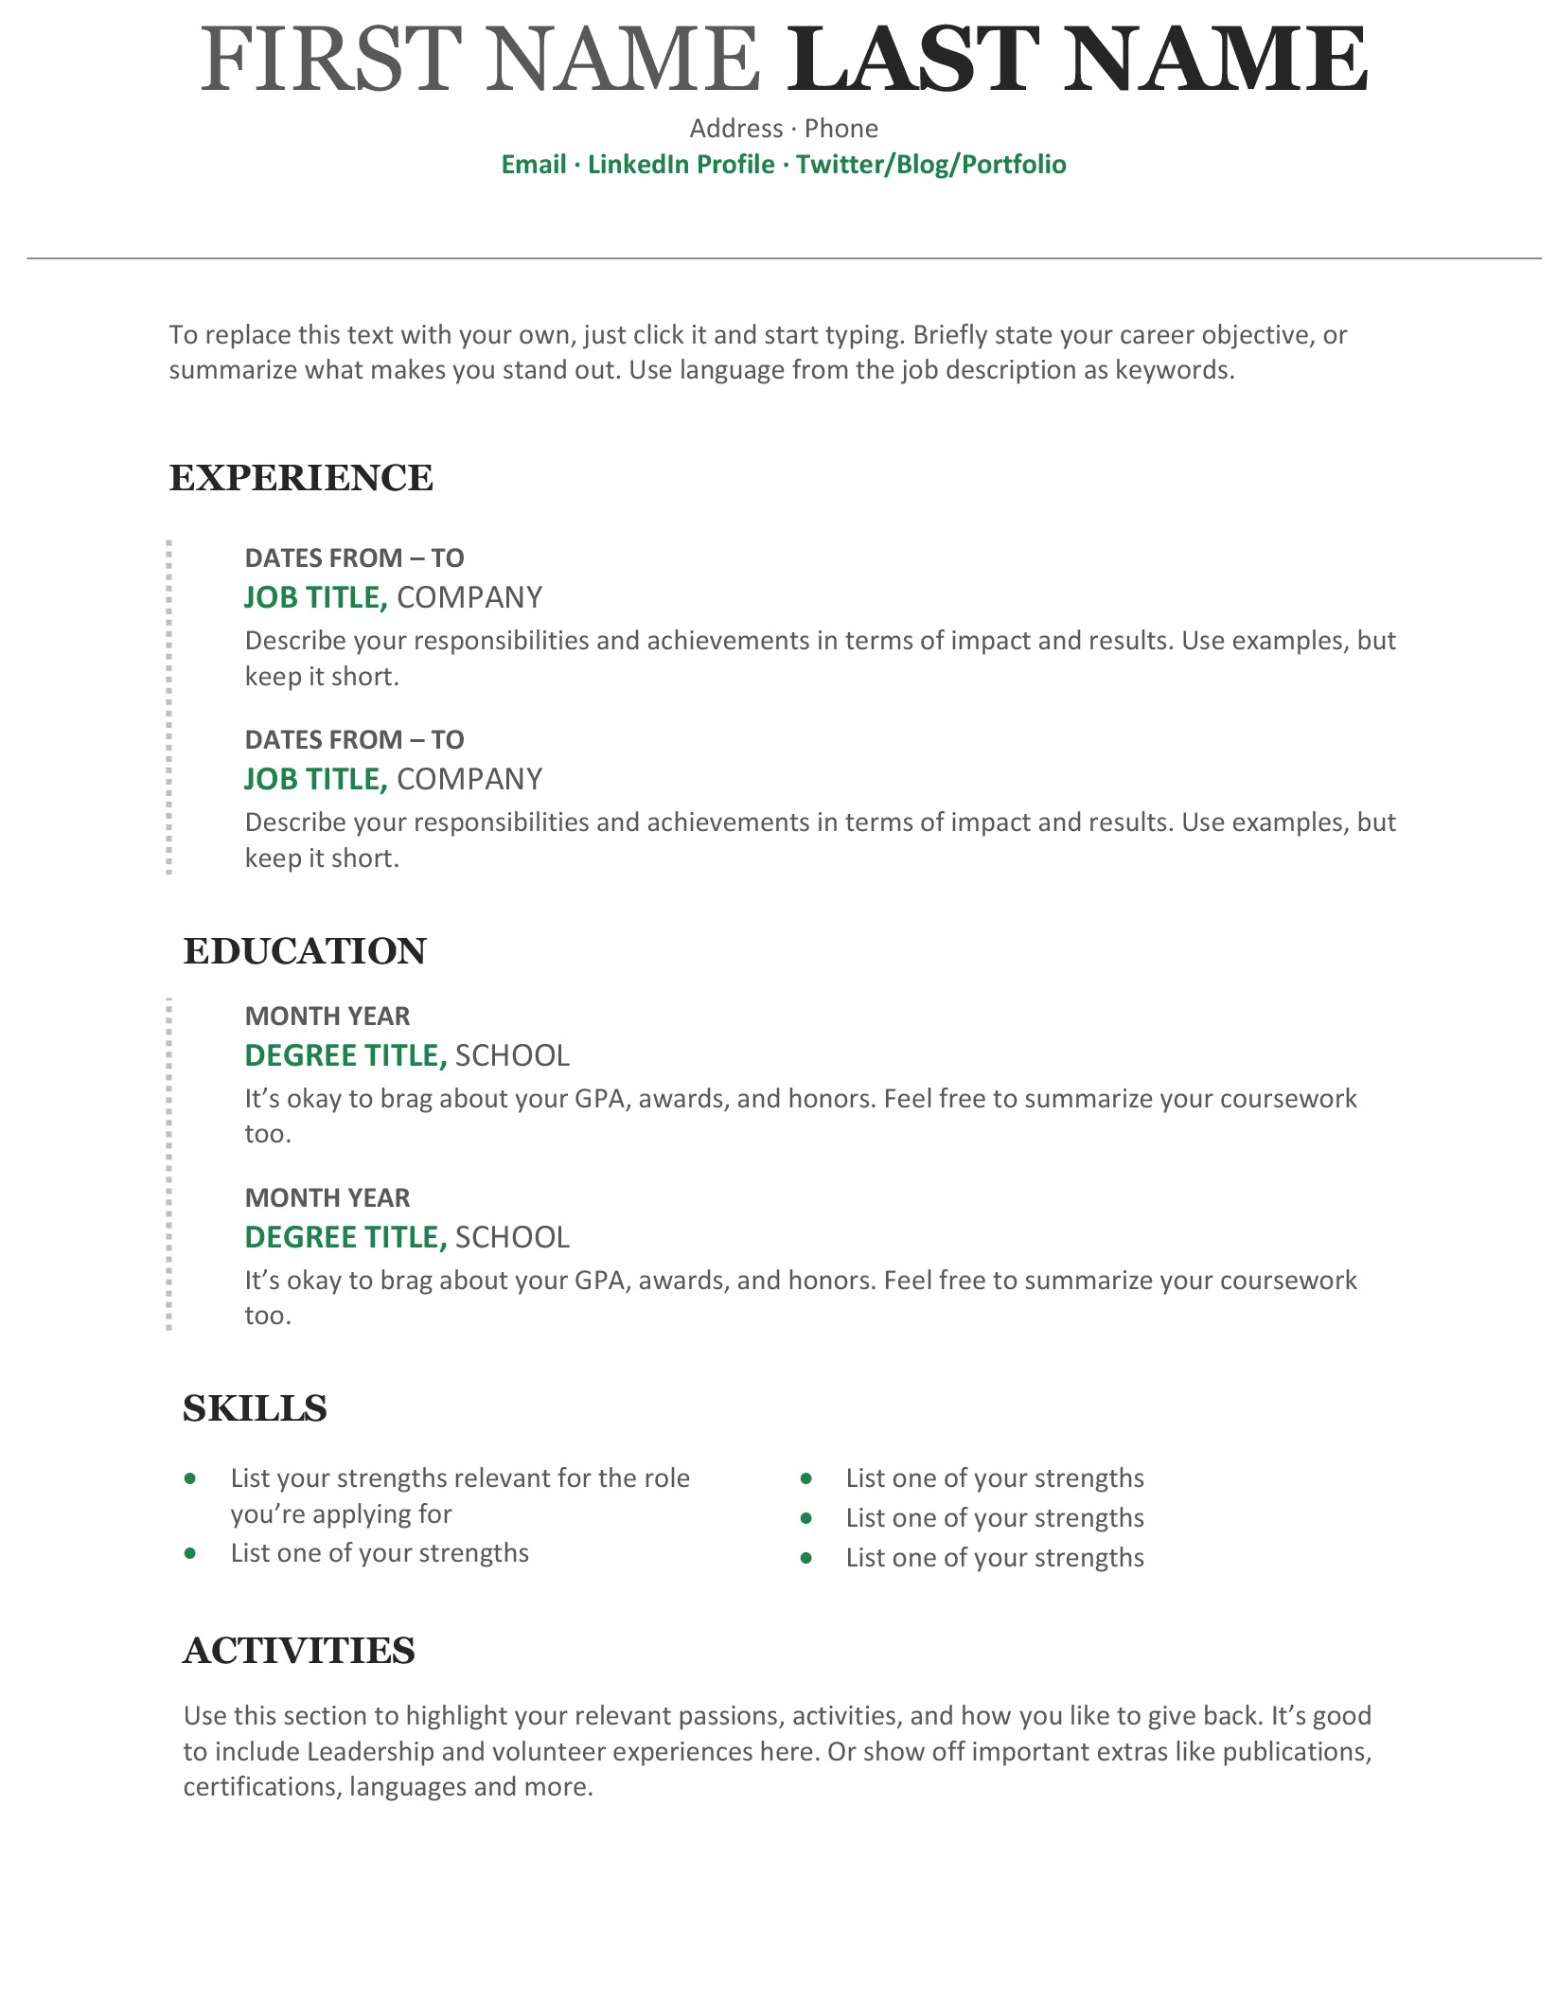 20+ Free And Premium Word Resume Templates [Download] With Regard To How To Find A Resume Template On Word